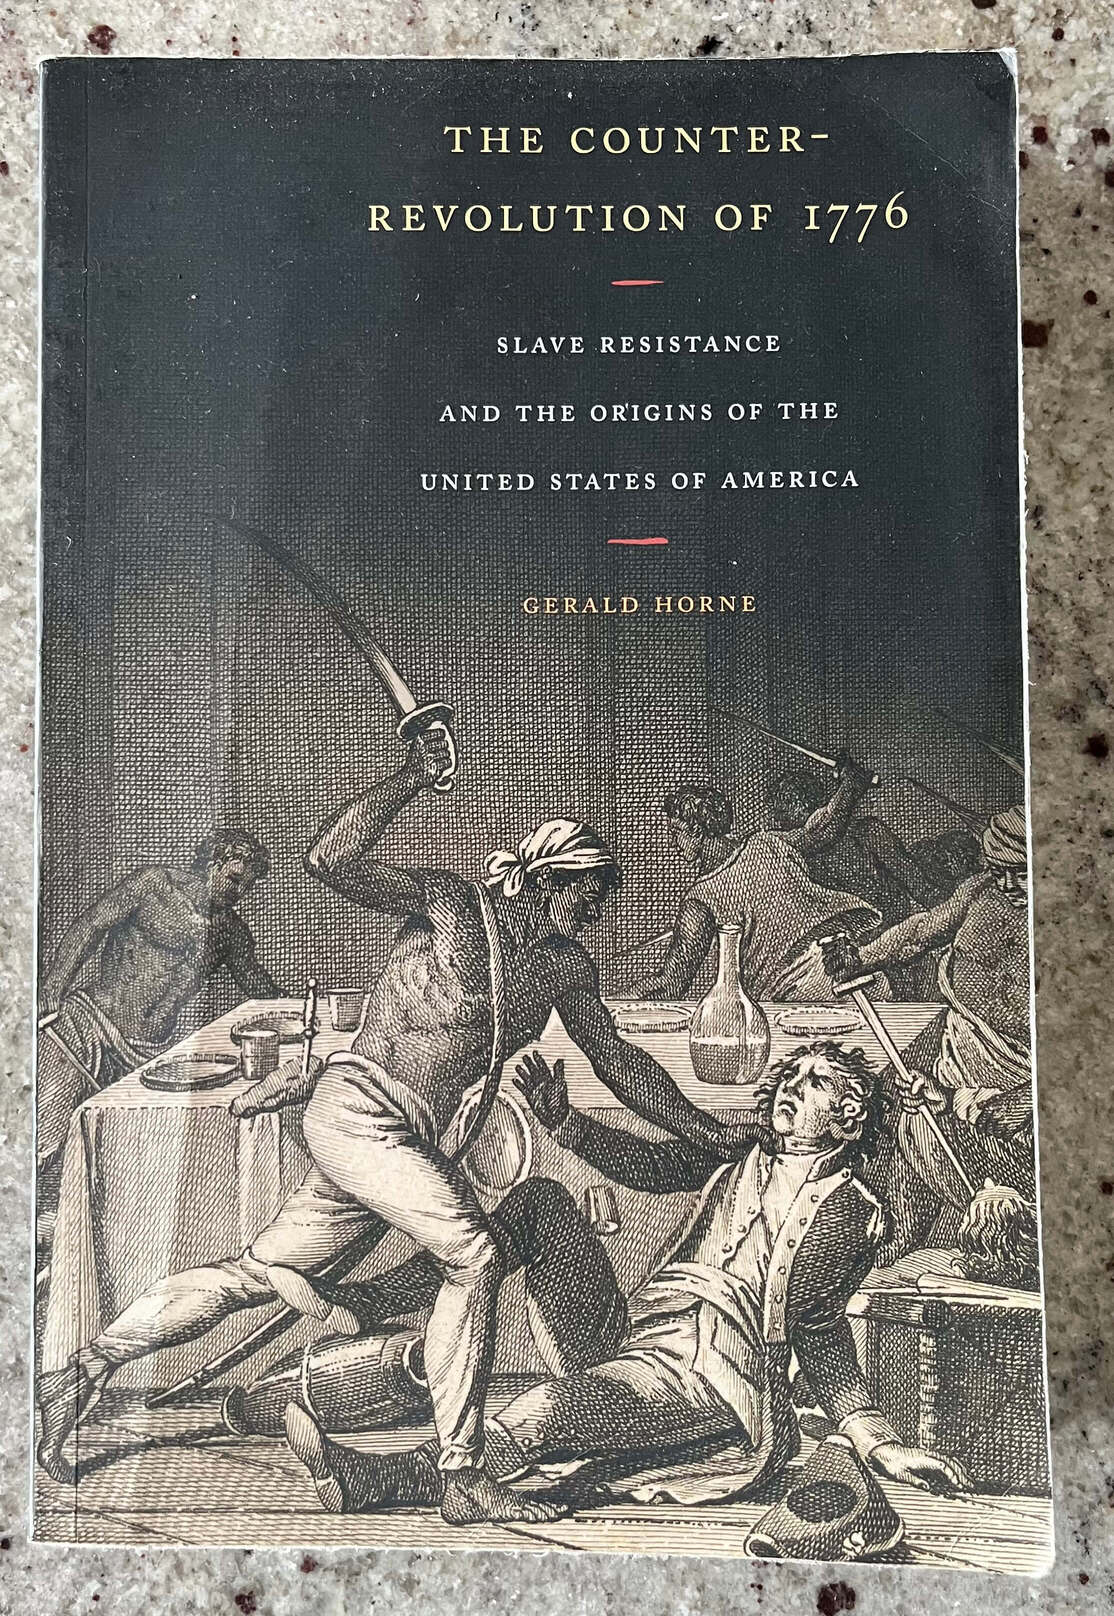 “The Counter-Revolution of 1776: Slave Resistance and the Origins of the United States of America” Gerald Horne